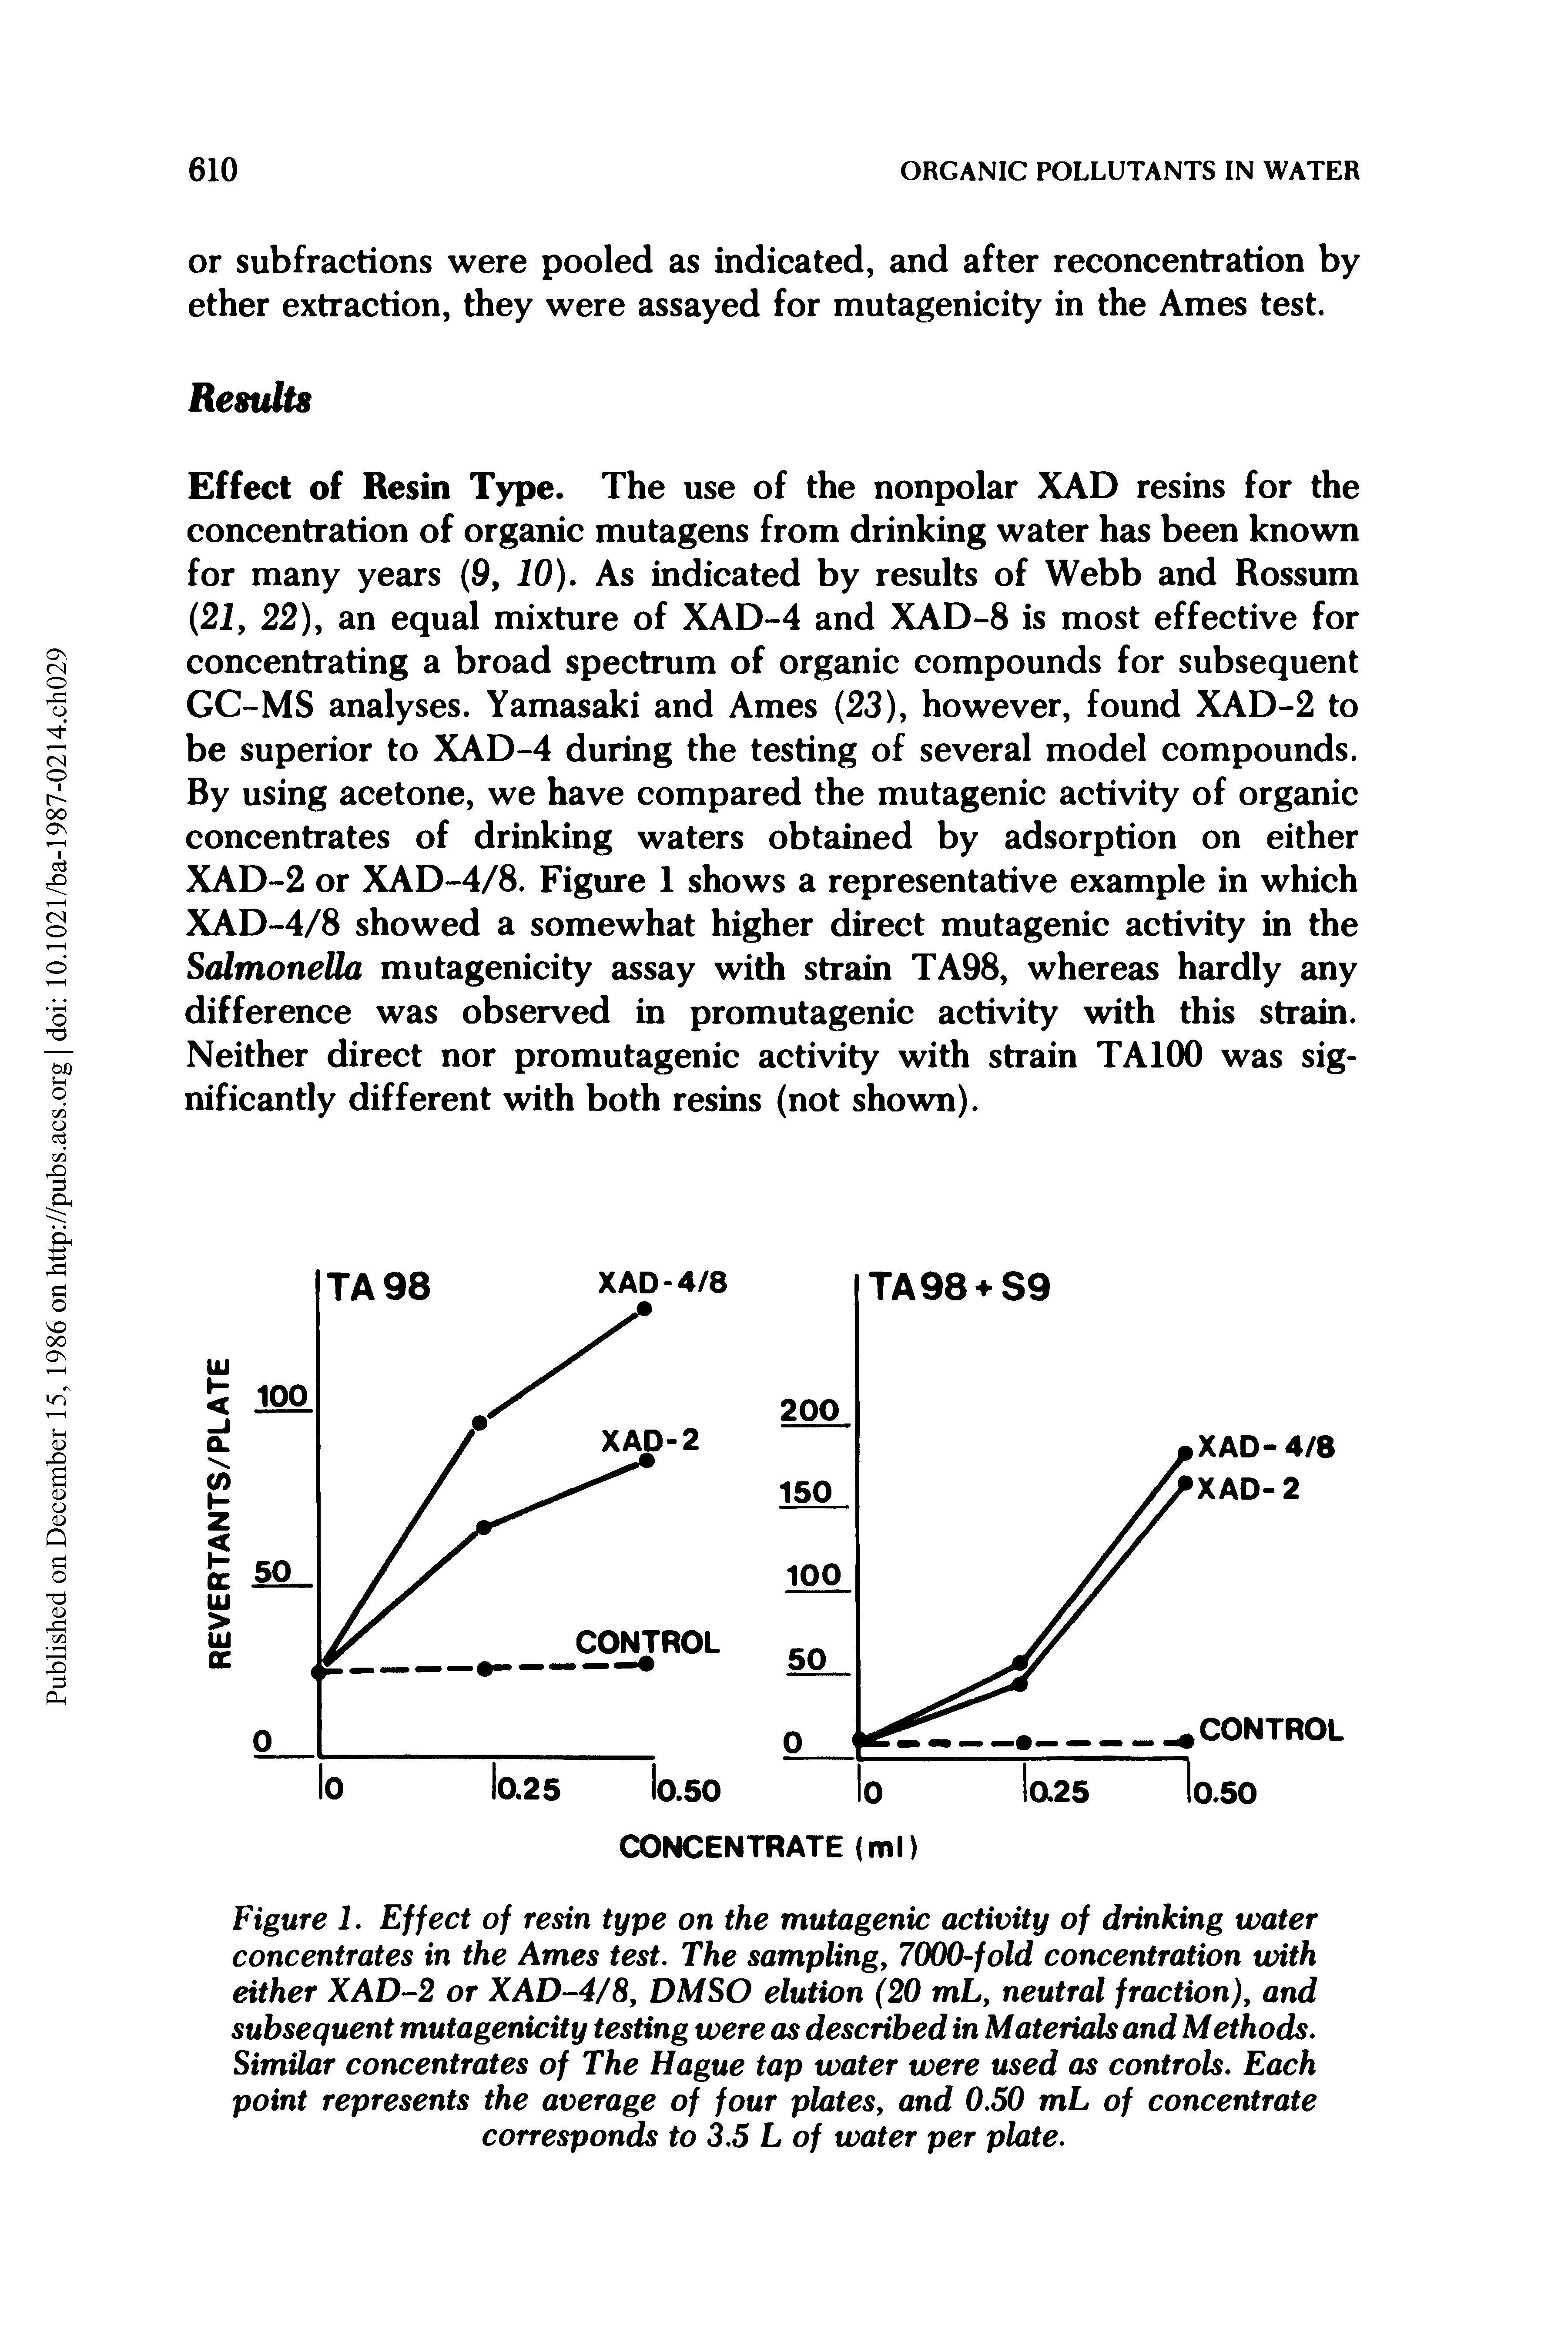 Figure 1. Effect of resin type on the mutagenic activity of drinking water concentrates in the Ames test. The sampling, 7000-fold concentration with either XAD-2 or XAD-4/8, DMSO elution (20 mL, neutral fraction), and subsequent mutagenicity testing were as described in Materials and Methods. Similar concentrates of The Hague tap water were used as controls. Each point represents the average of four plates, and 0.50 mL of concentrate corresponds to 3.5 L of water per plate.